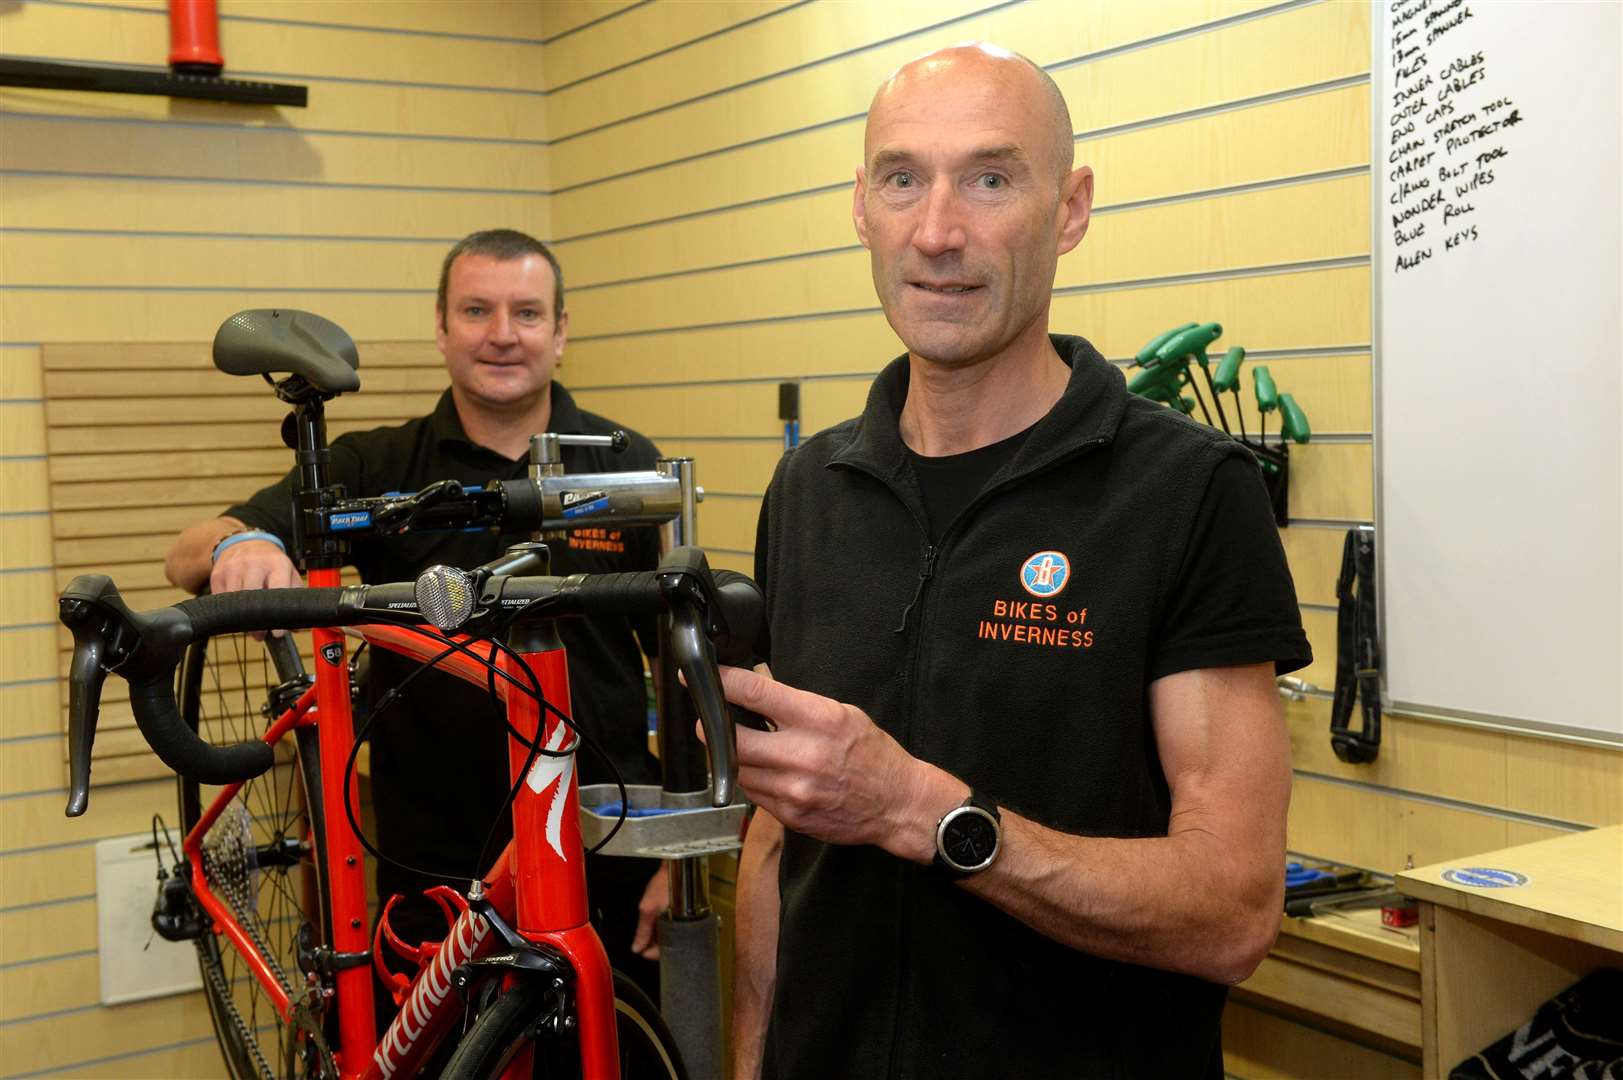 Roddy and Kenny Riddle, of Bikes of Inverness, saw a rise in the popularity of cycling.